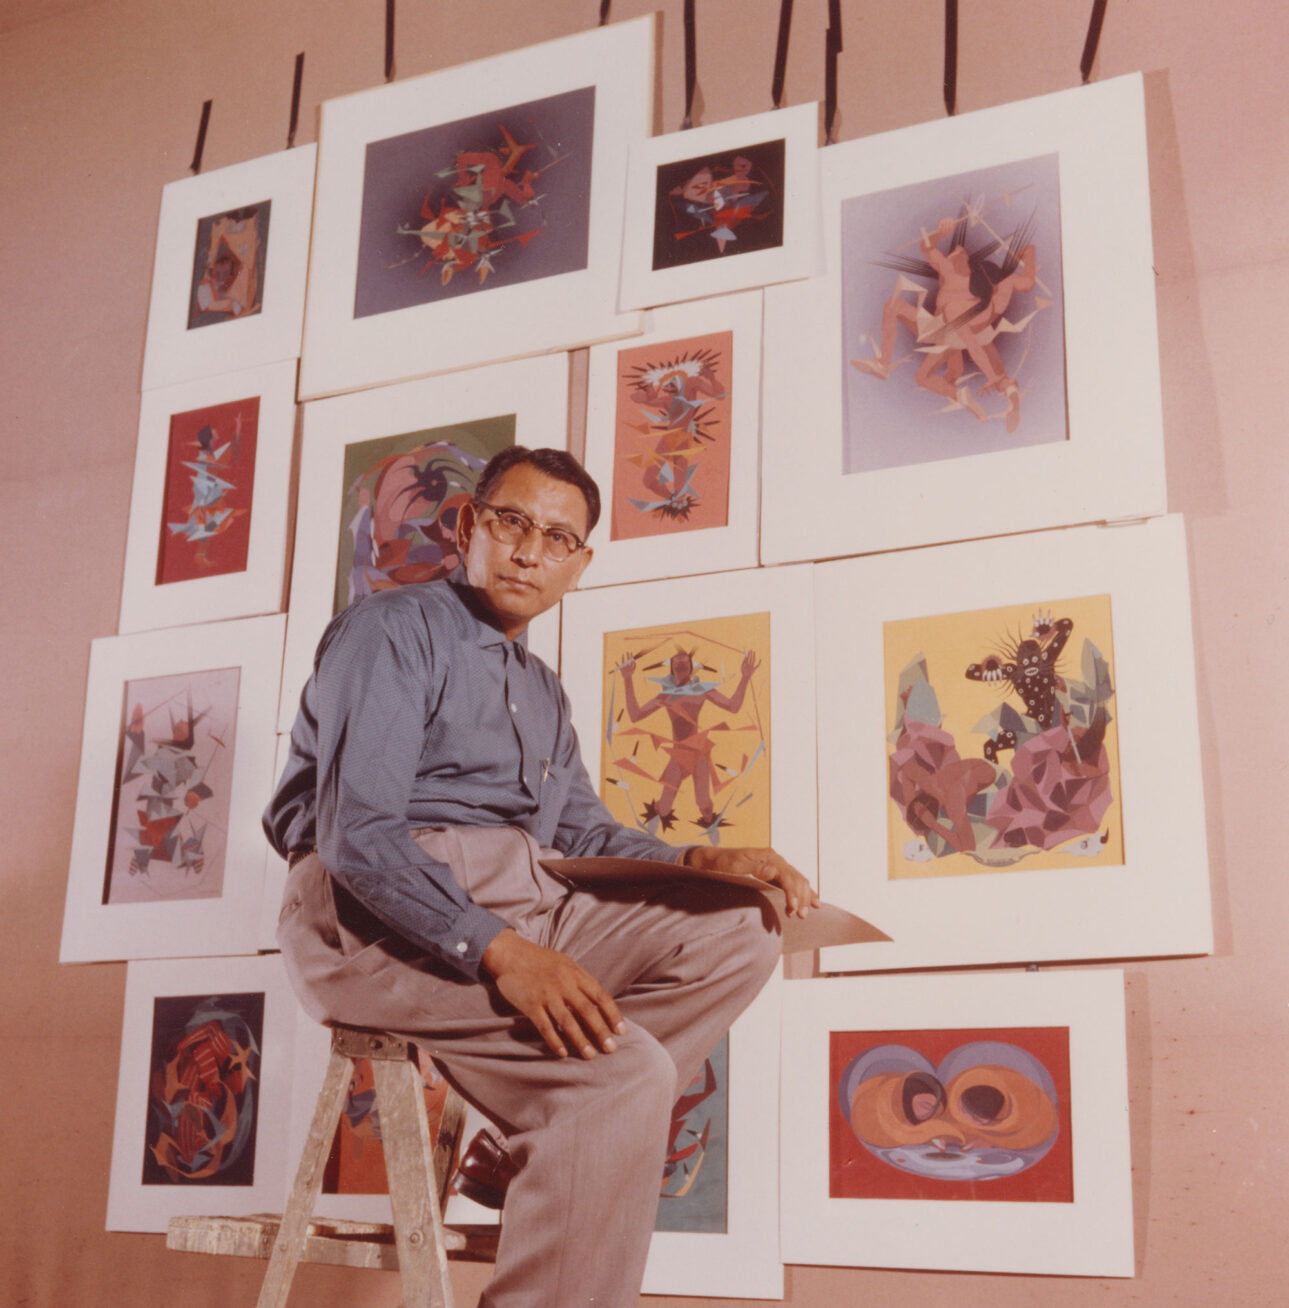 Artist Oscar Howe sitting on a ladder in front of a wall of his paintings.